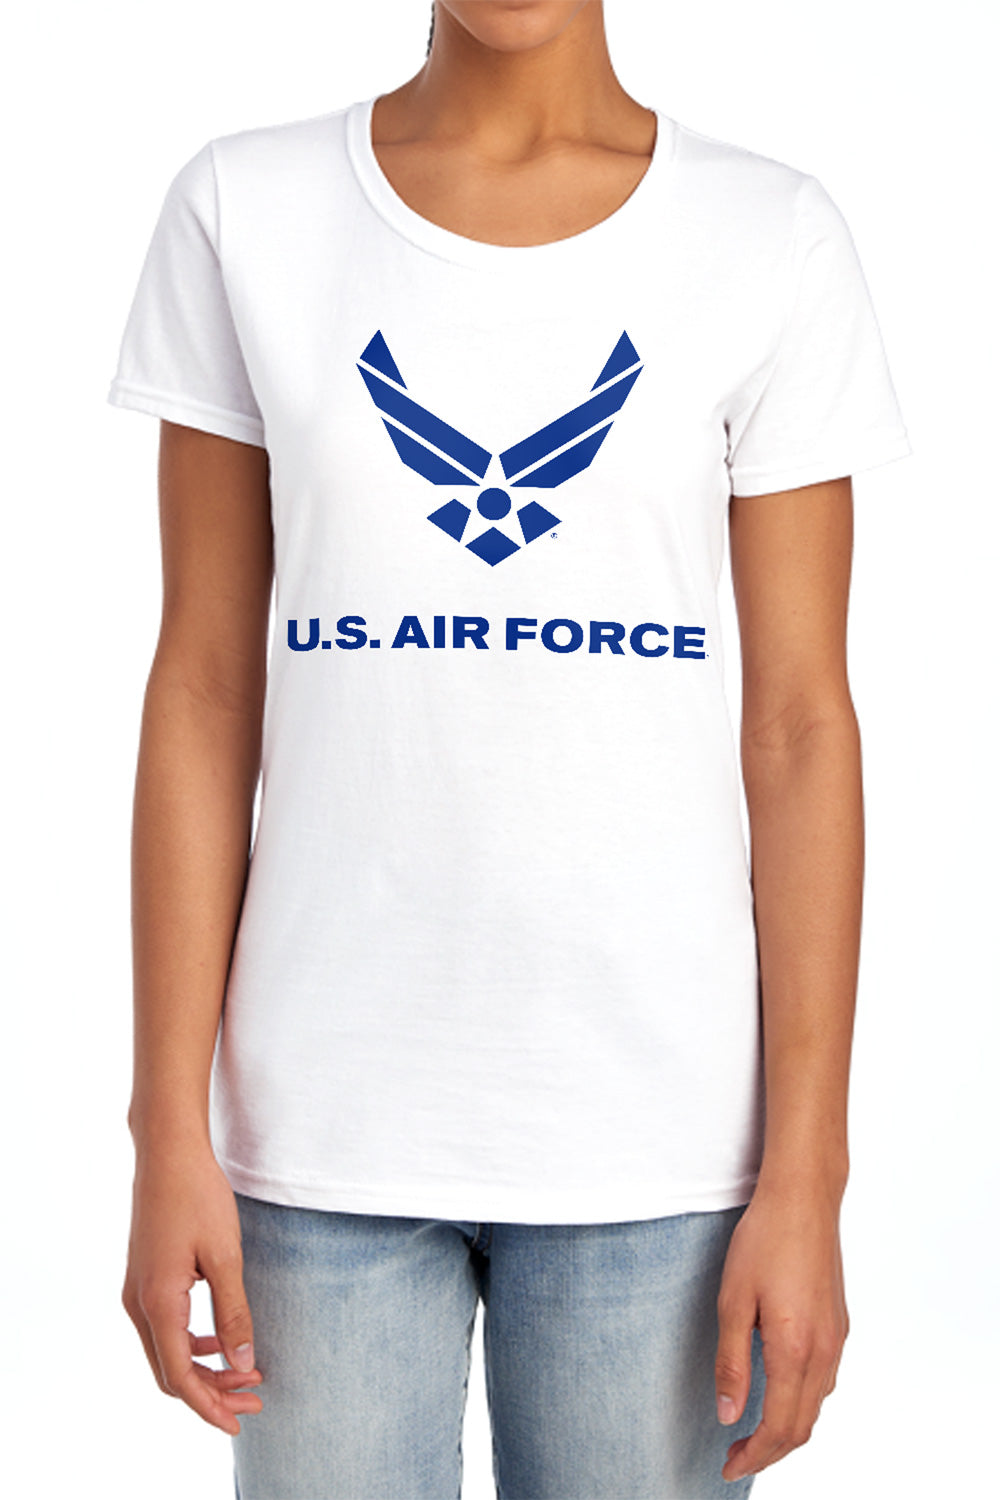 AIR FORCE : DISTRESSED LOGO S\S WOMENS TEE White 2X